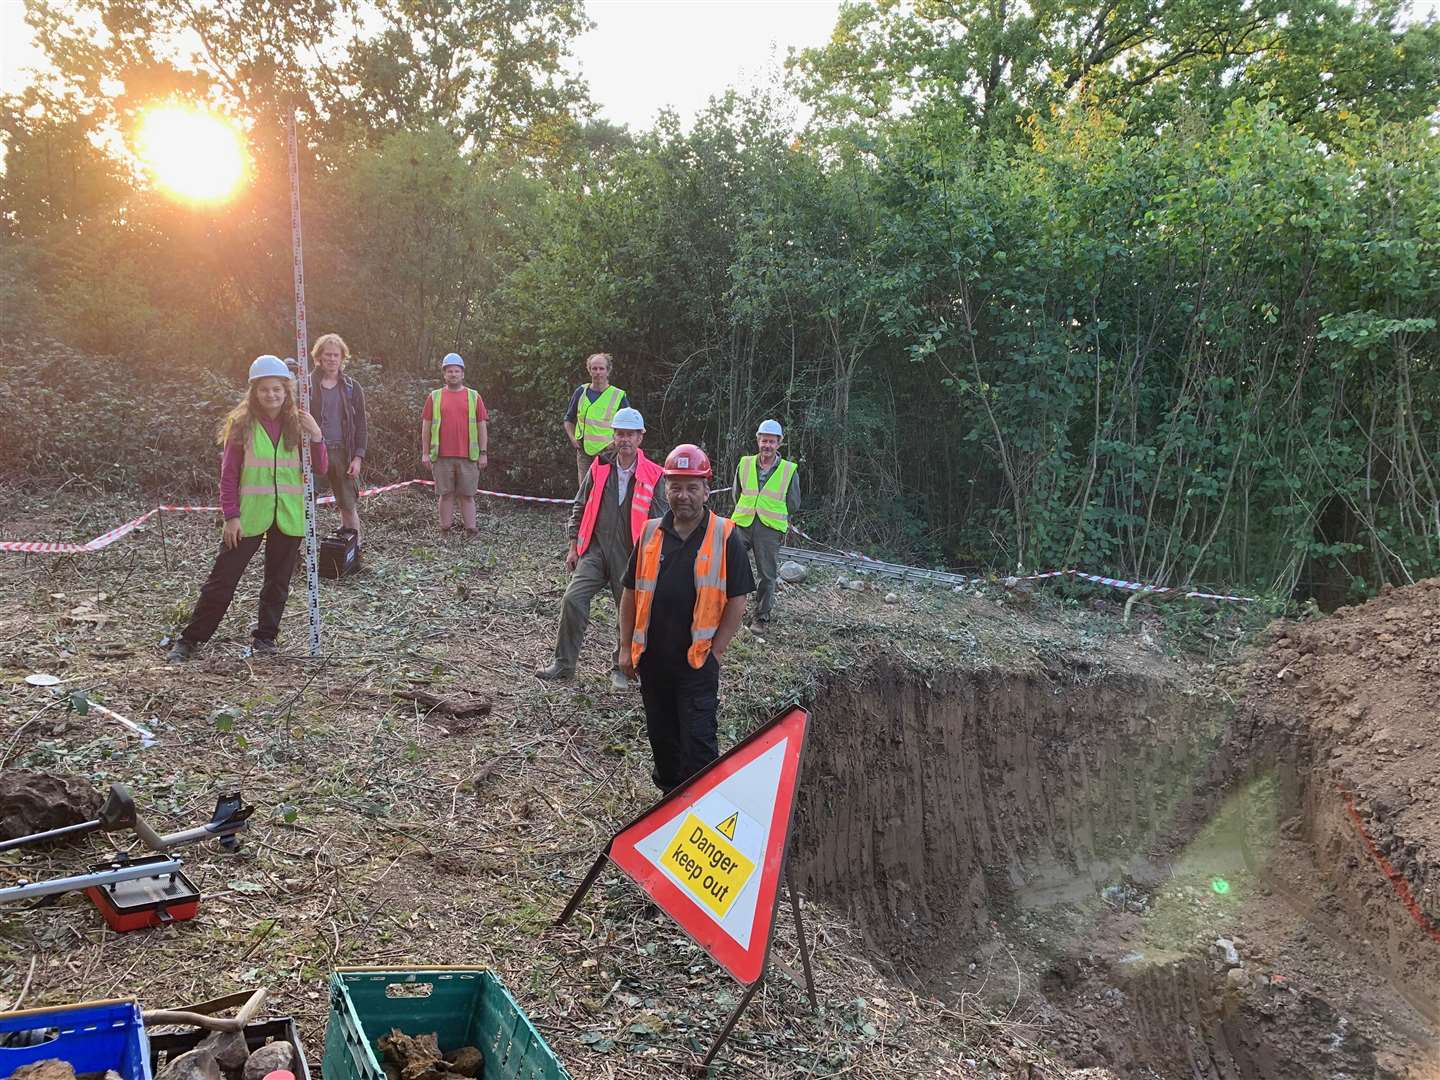 The team working on the dig. From left: Alice Leader, Andy Wall and Andy Kay of JC White Geomatics, Dan Tuson, Colin Welch of Research Resource, Colin Dimmock and Sean Welch of Research Resource